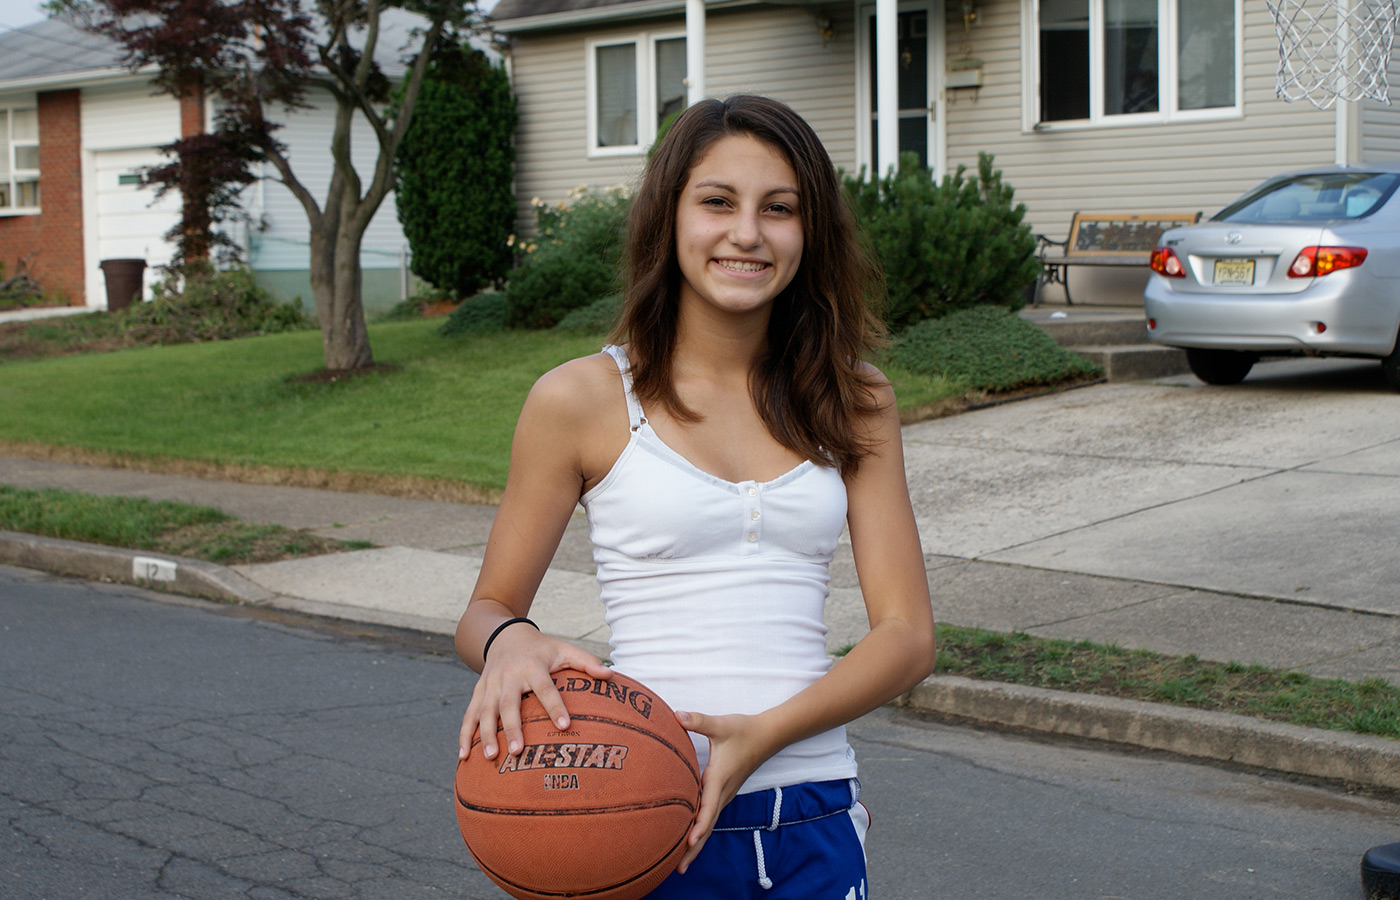 A teen holding a basketball in the street.